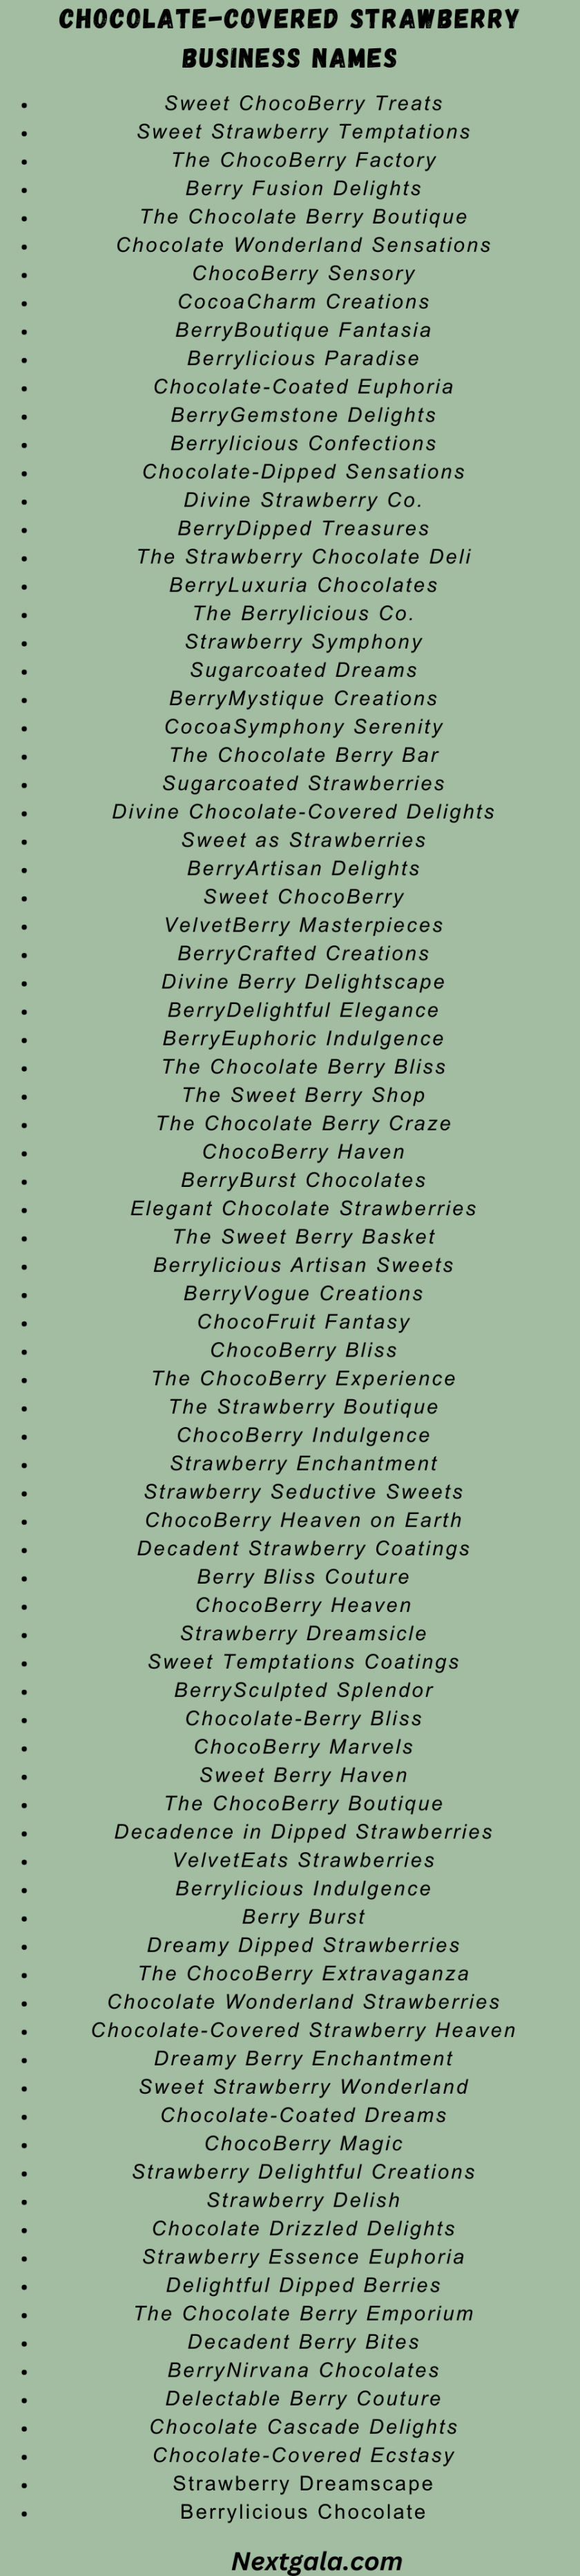 Chocolate-Covered Strawberry Business Names